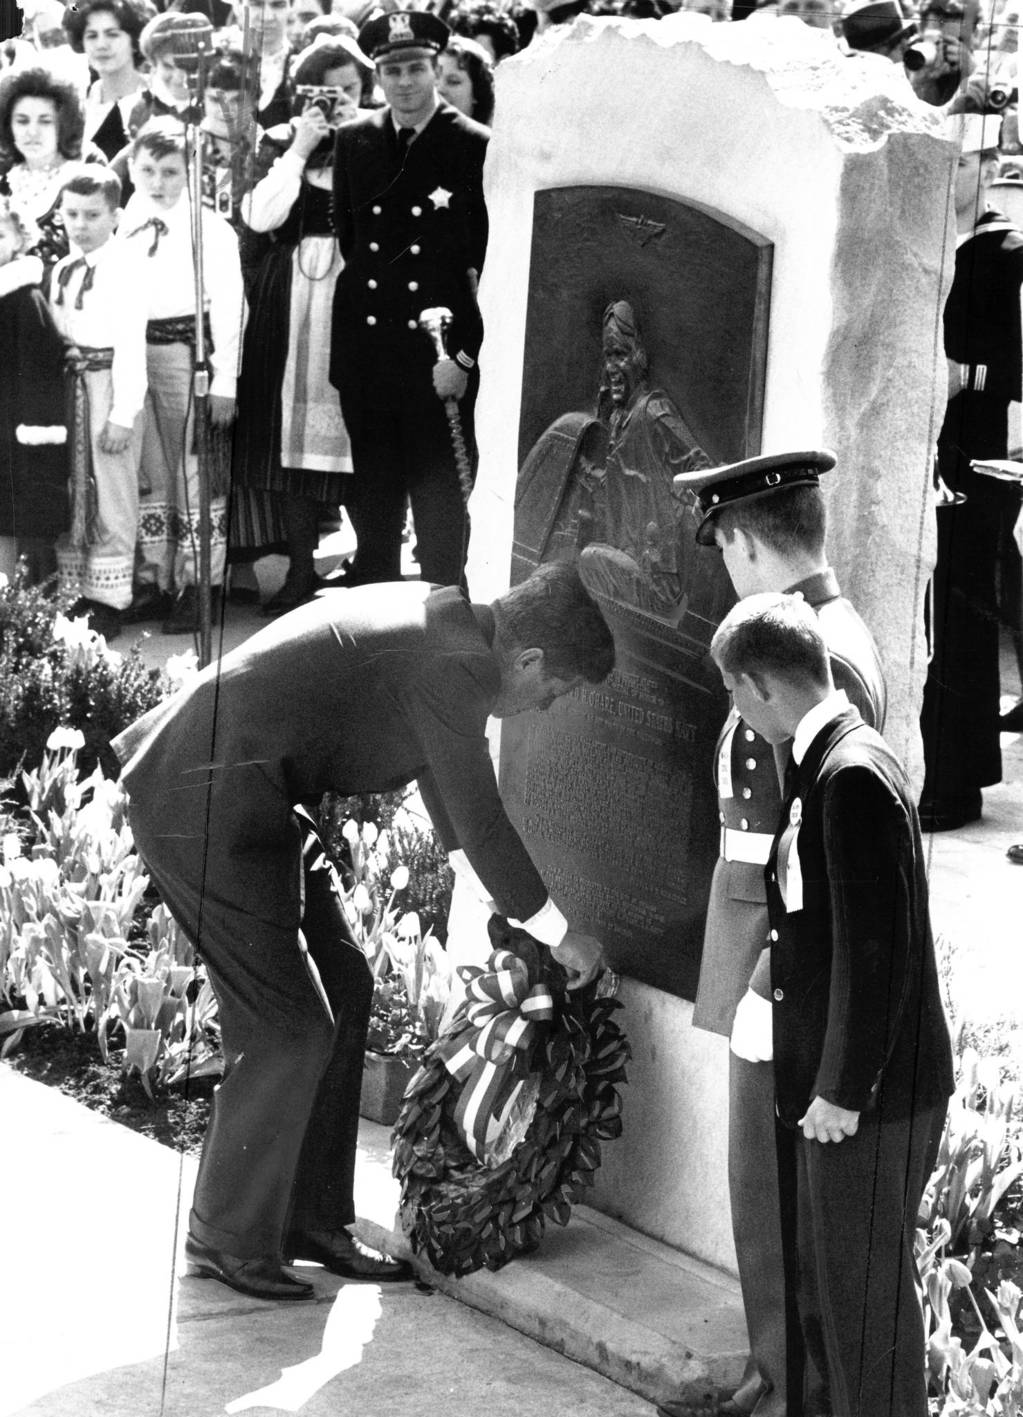 In 1963 President Kennedy lays a wreath on a monument dedicated to Lt. Comdr. Edward 